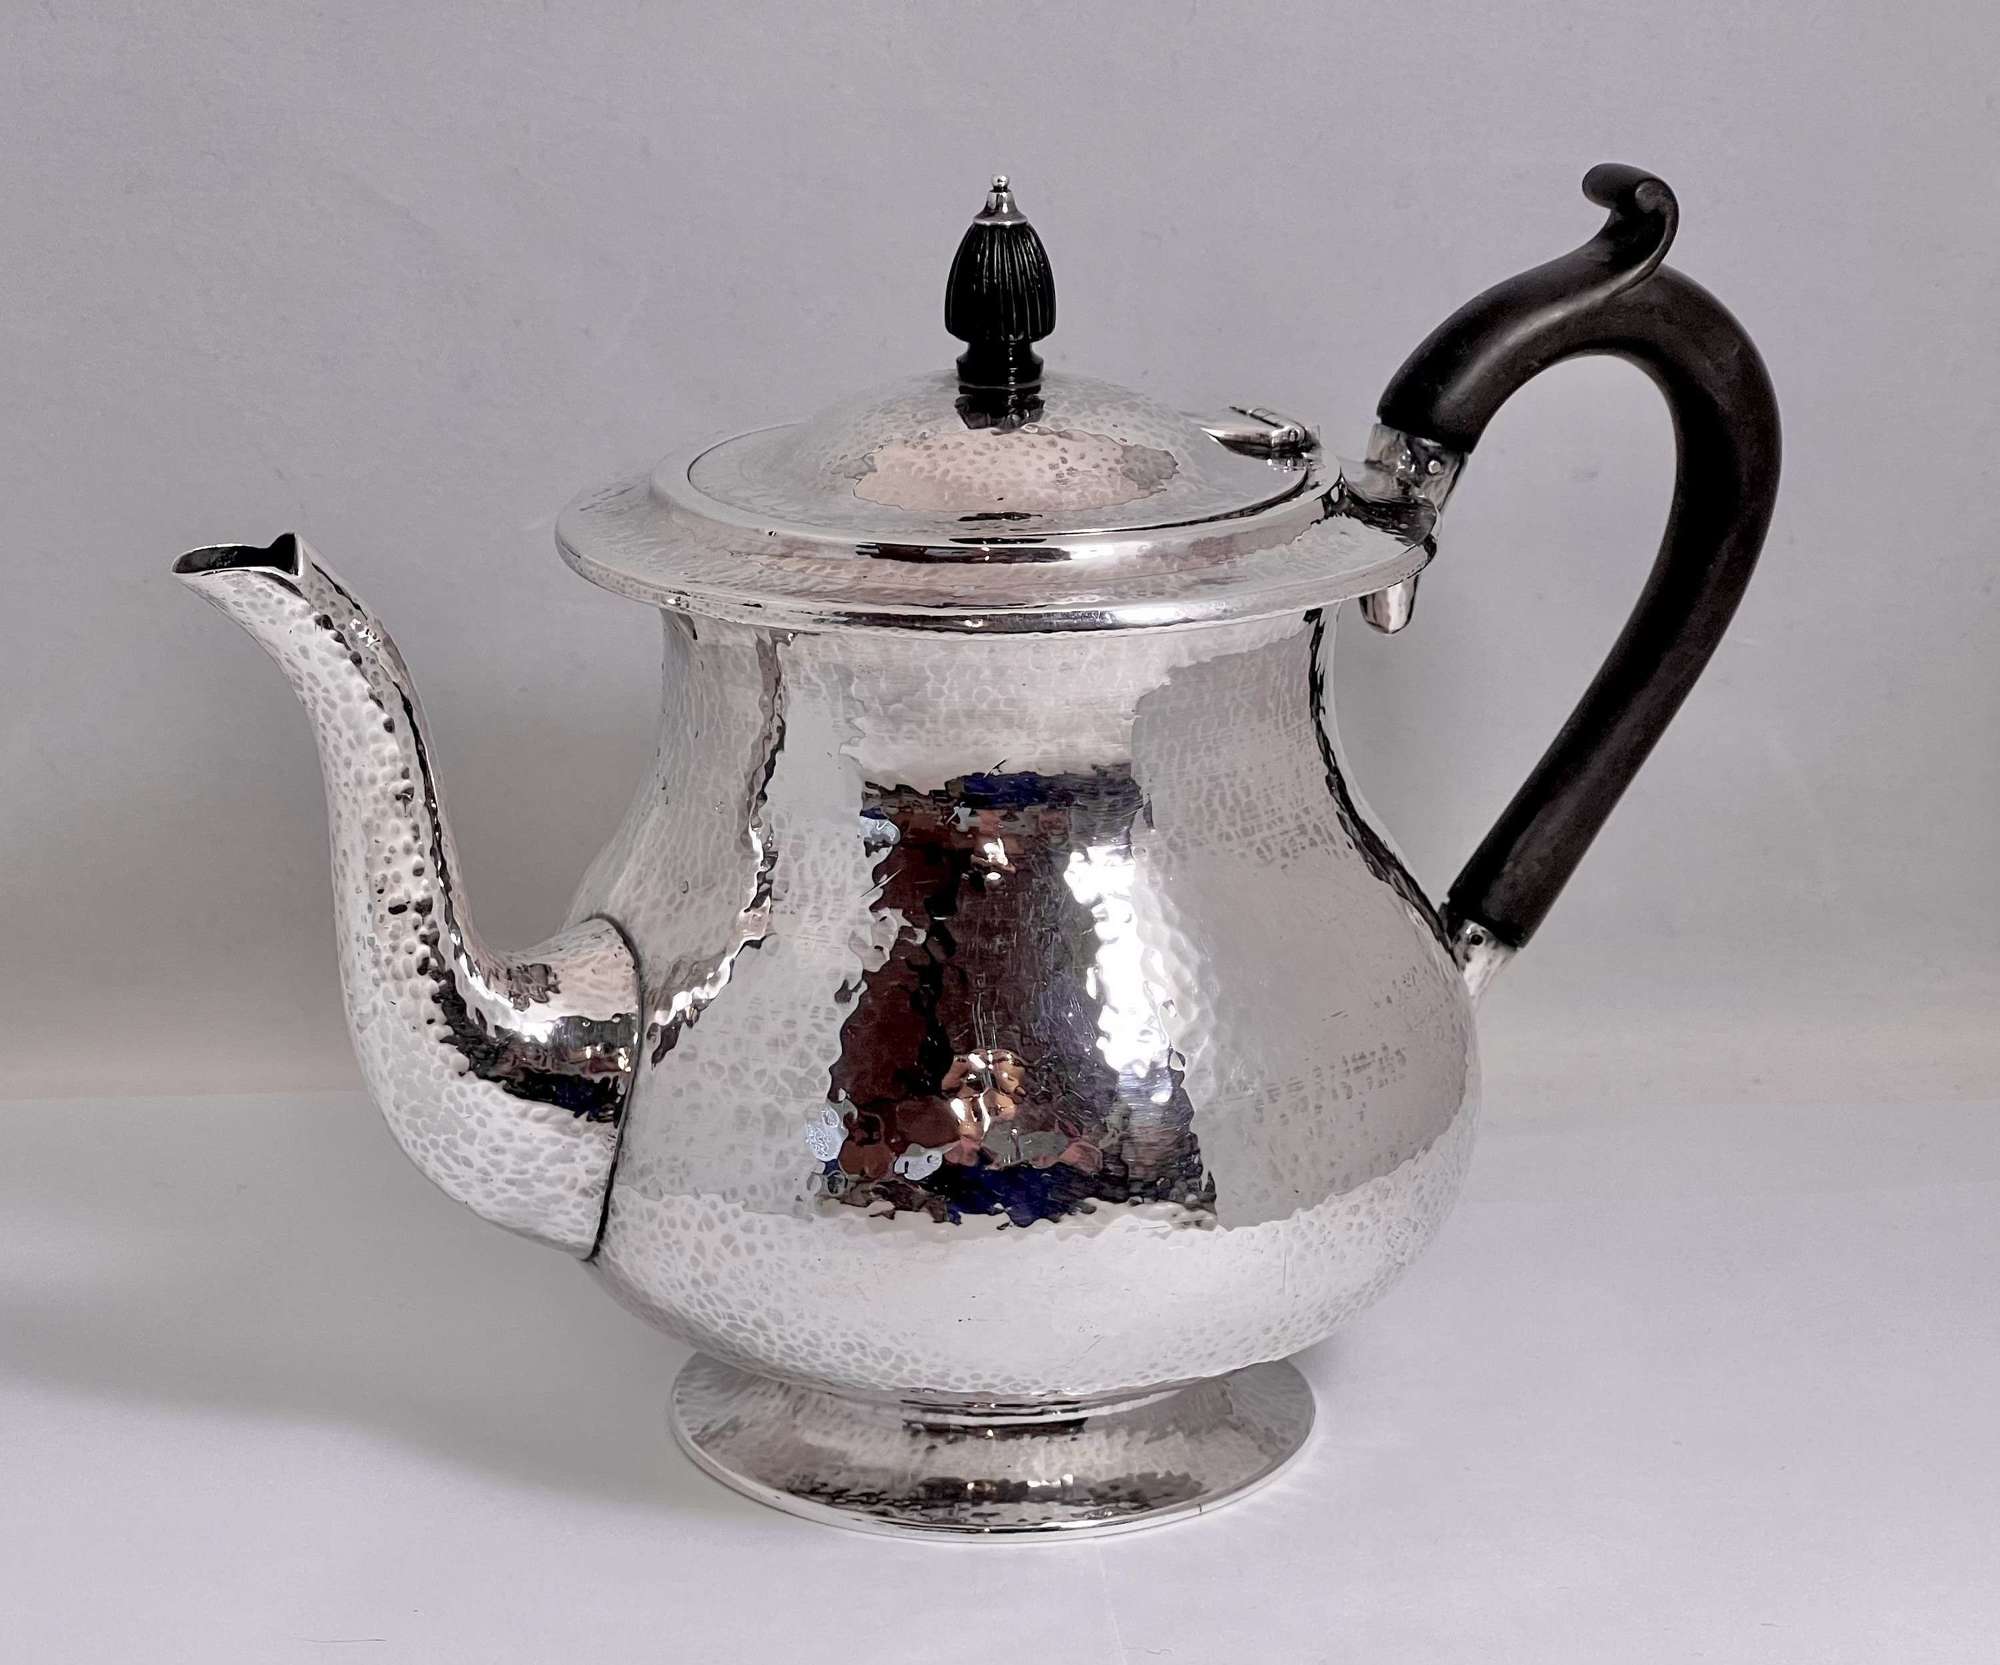 Arts and Crafts silver teapot by Sybil Dunlop, London 1930.